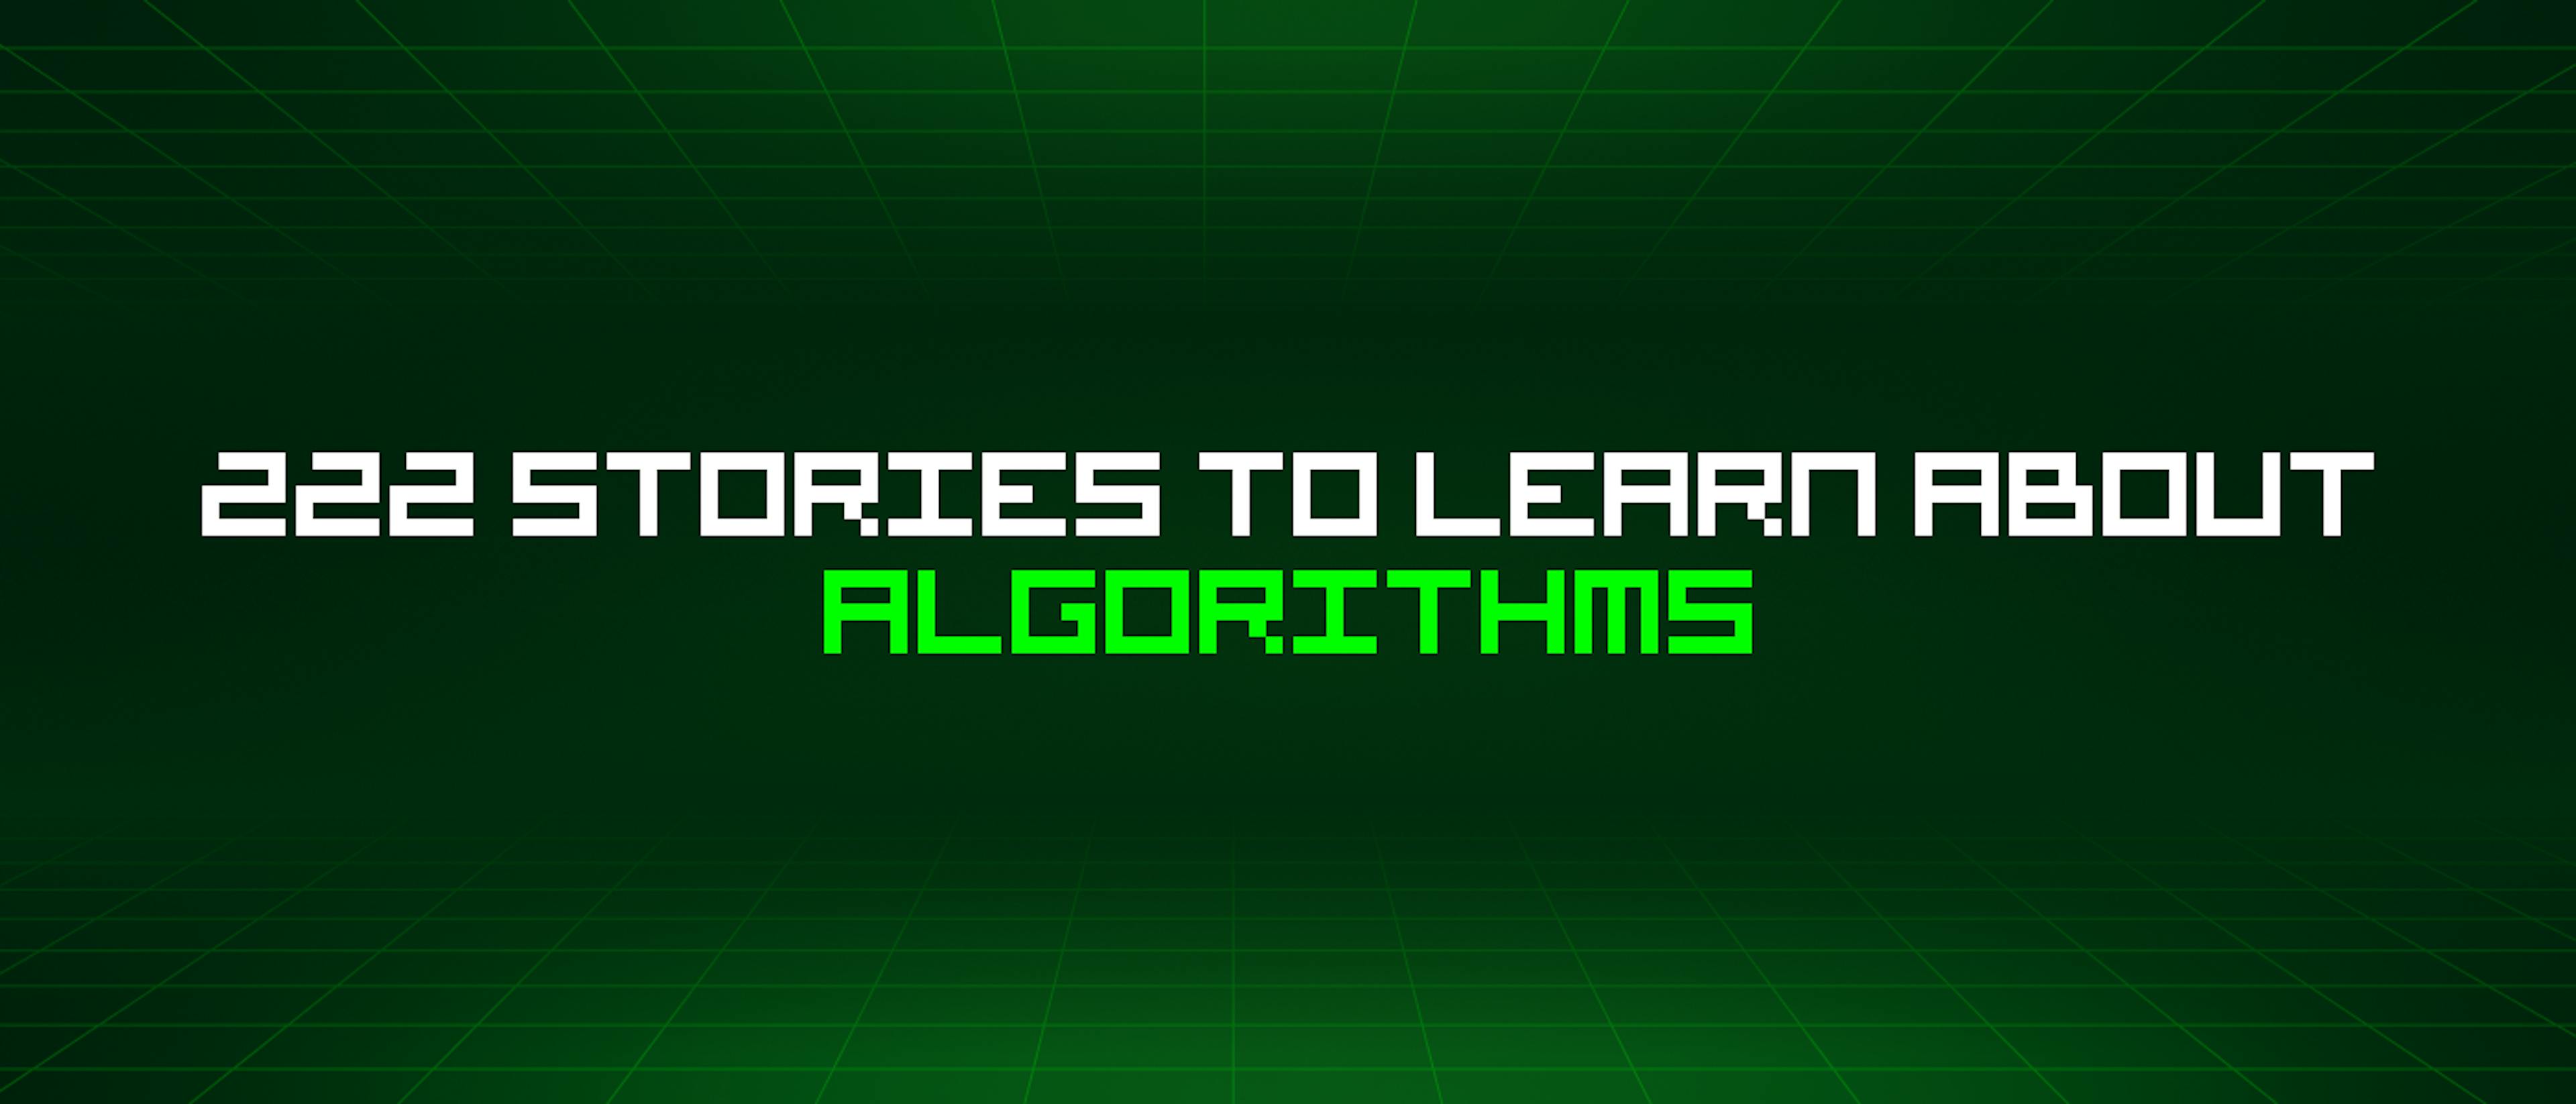 featured image - 222 Stories To Learn About Algorithms